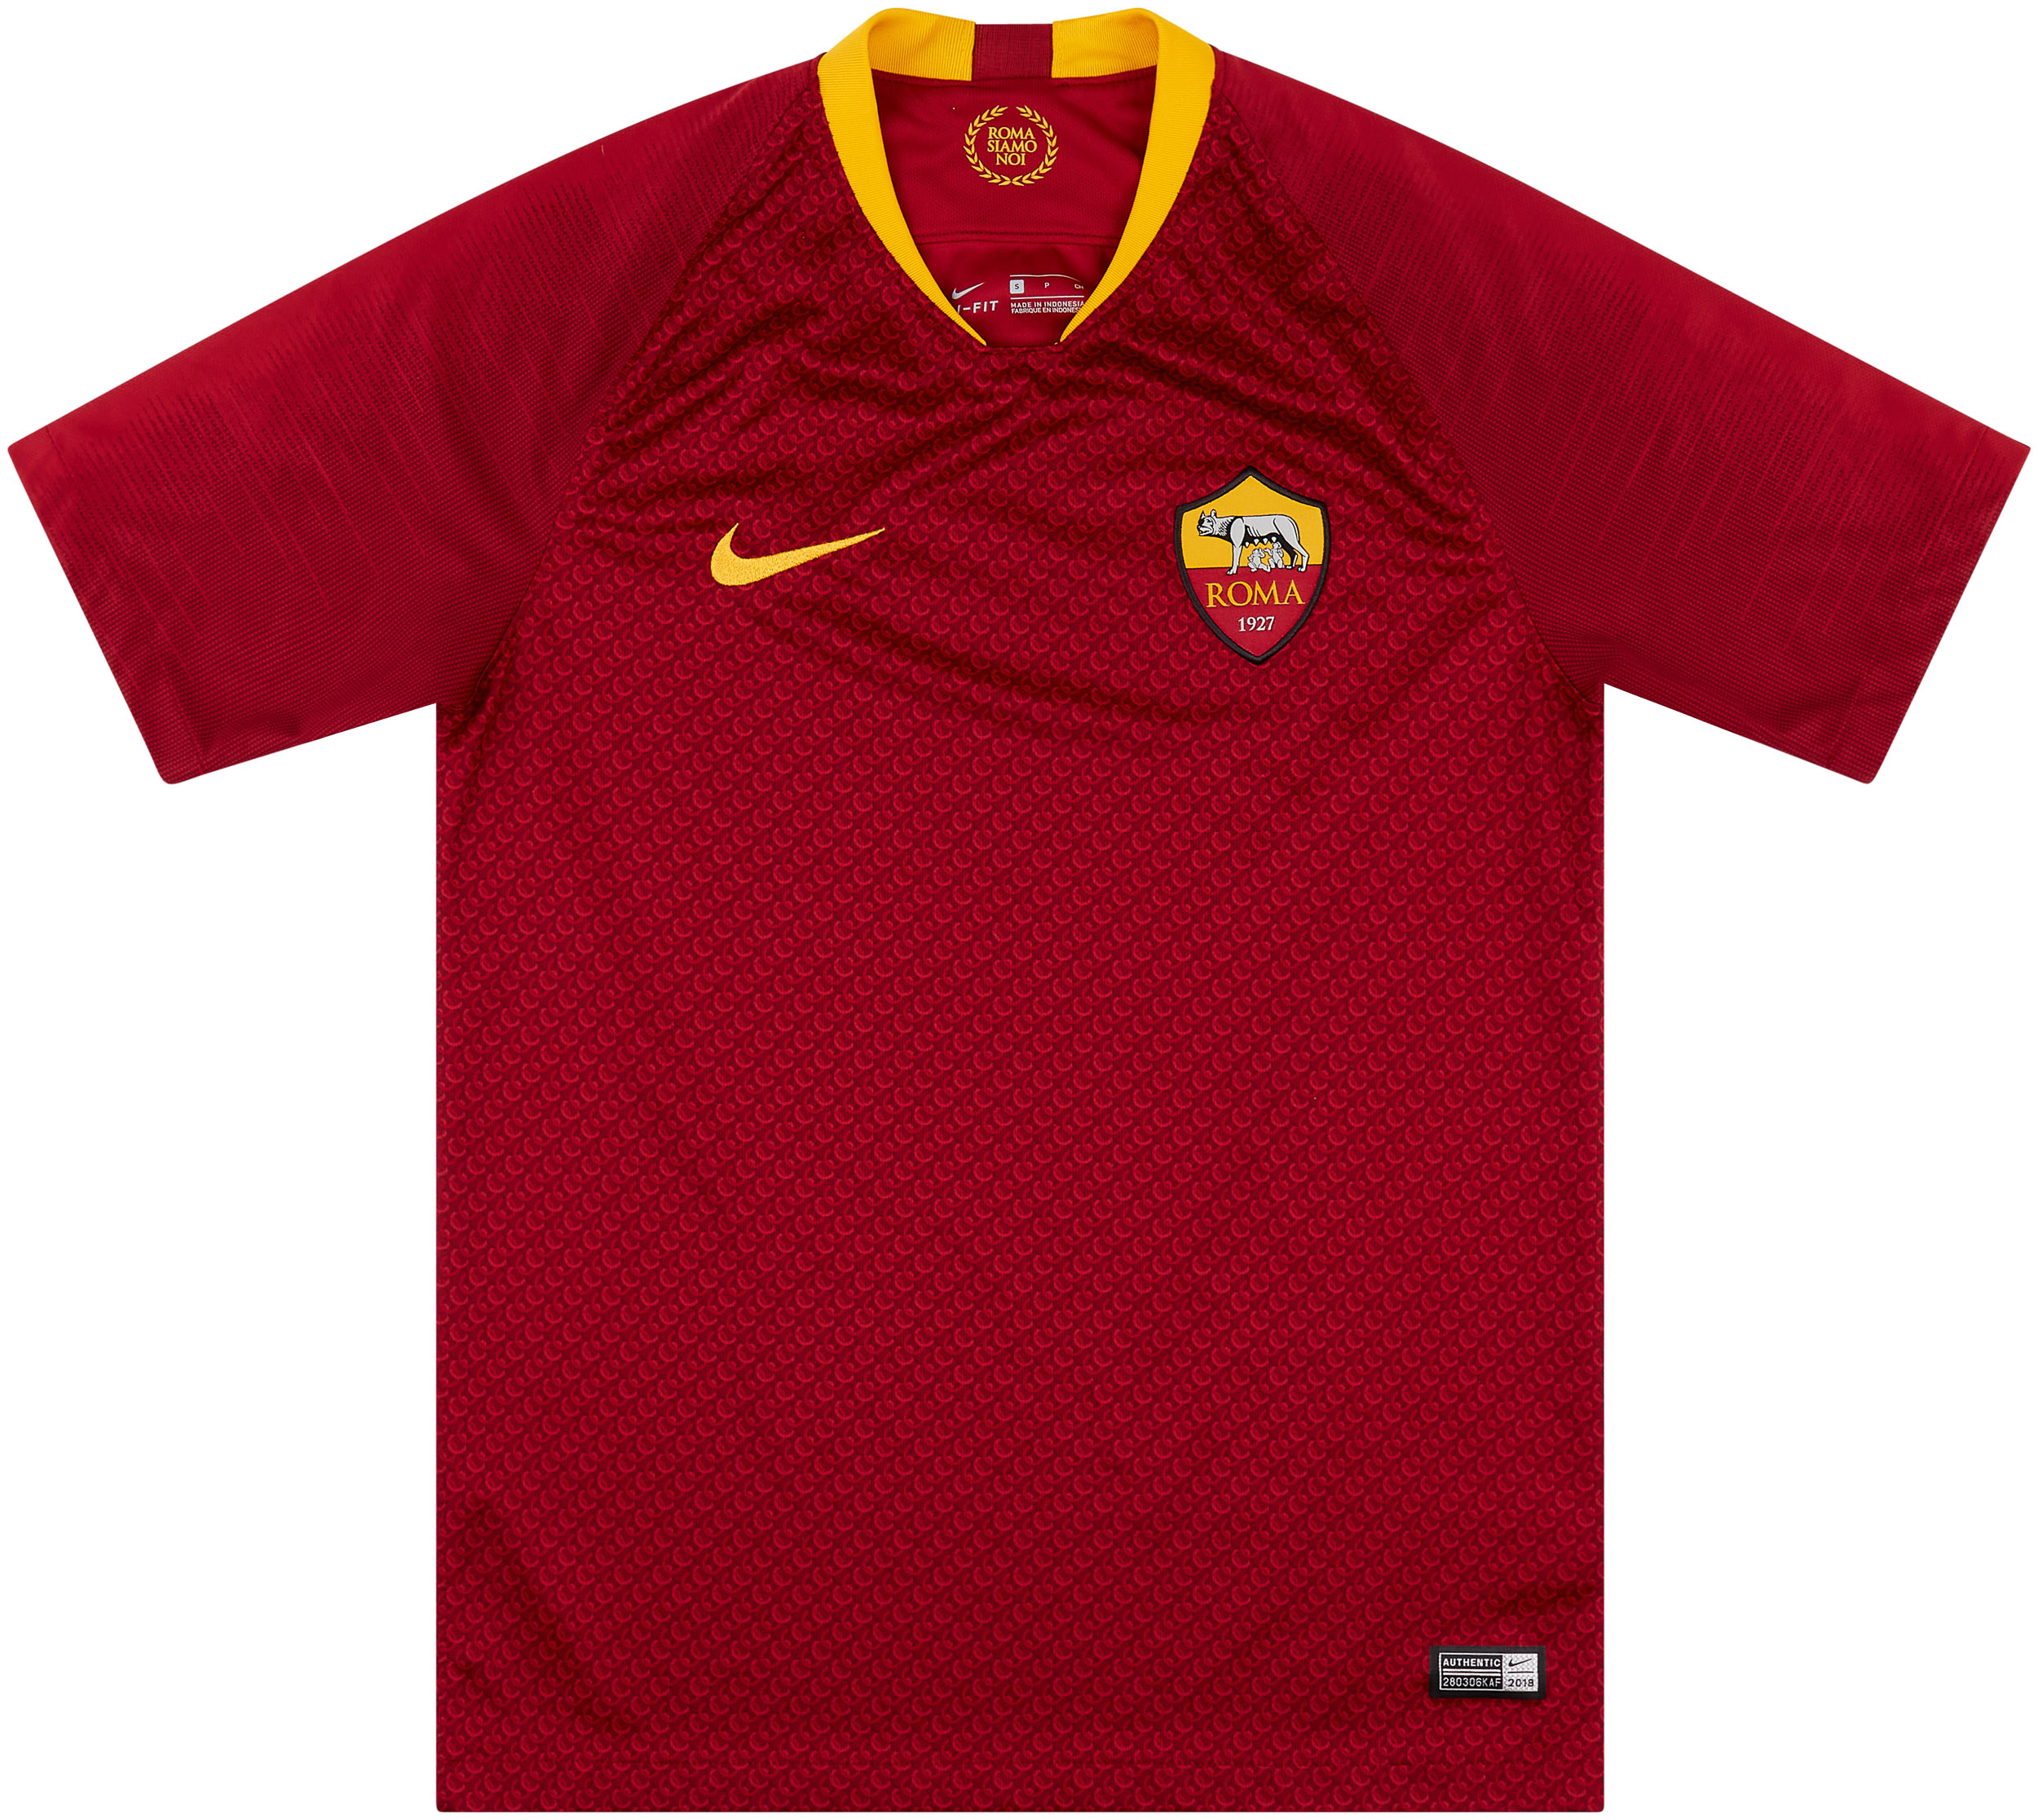 Roma Home Maillot de foot 2021 - 2022. Sponsored by Digitalbits